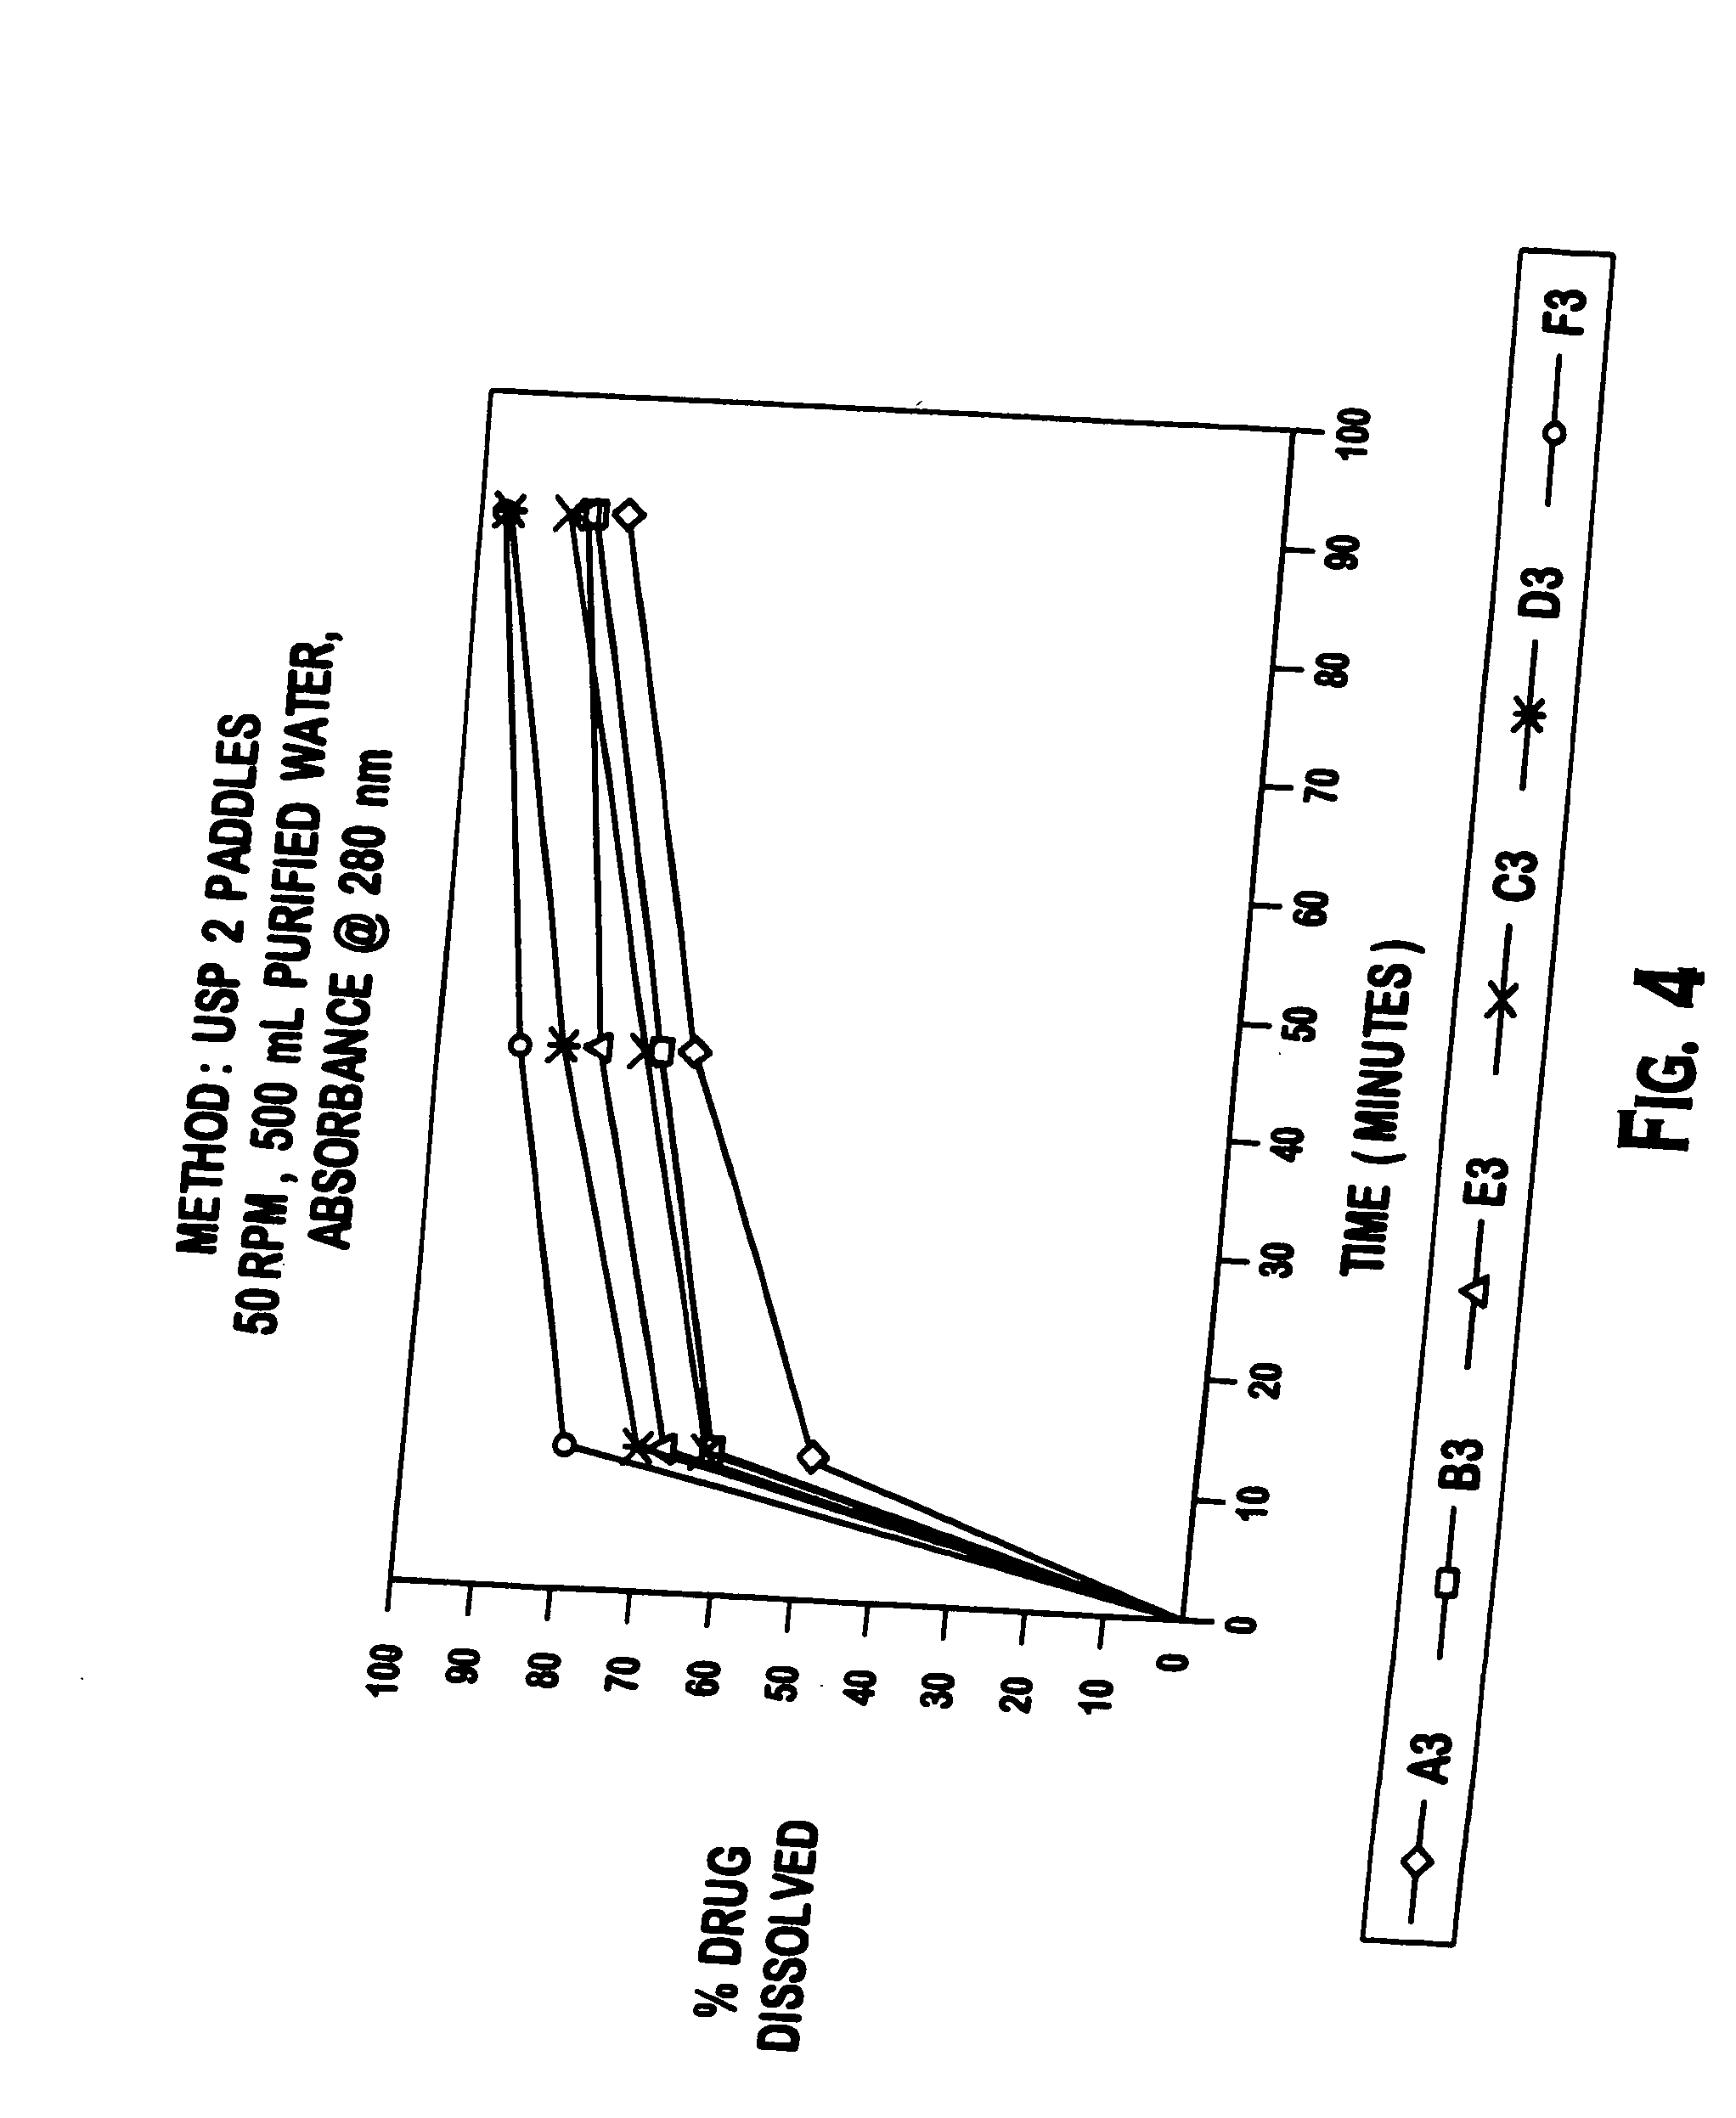 Methods and compositions for deterring abuse of orally administered pharmaceutical products